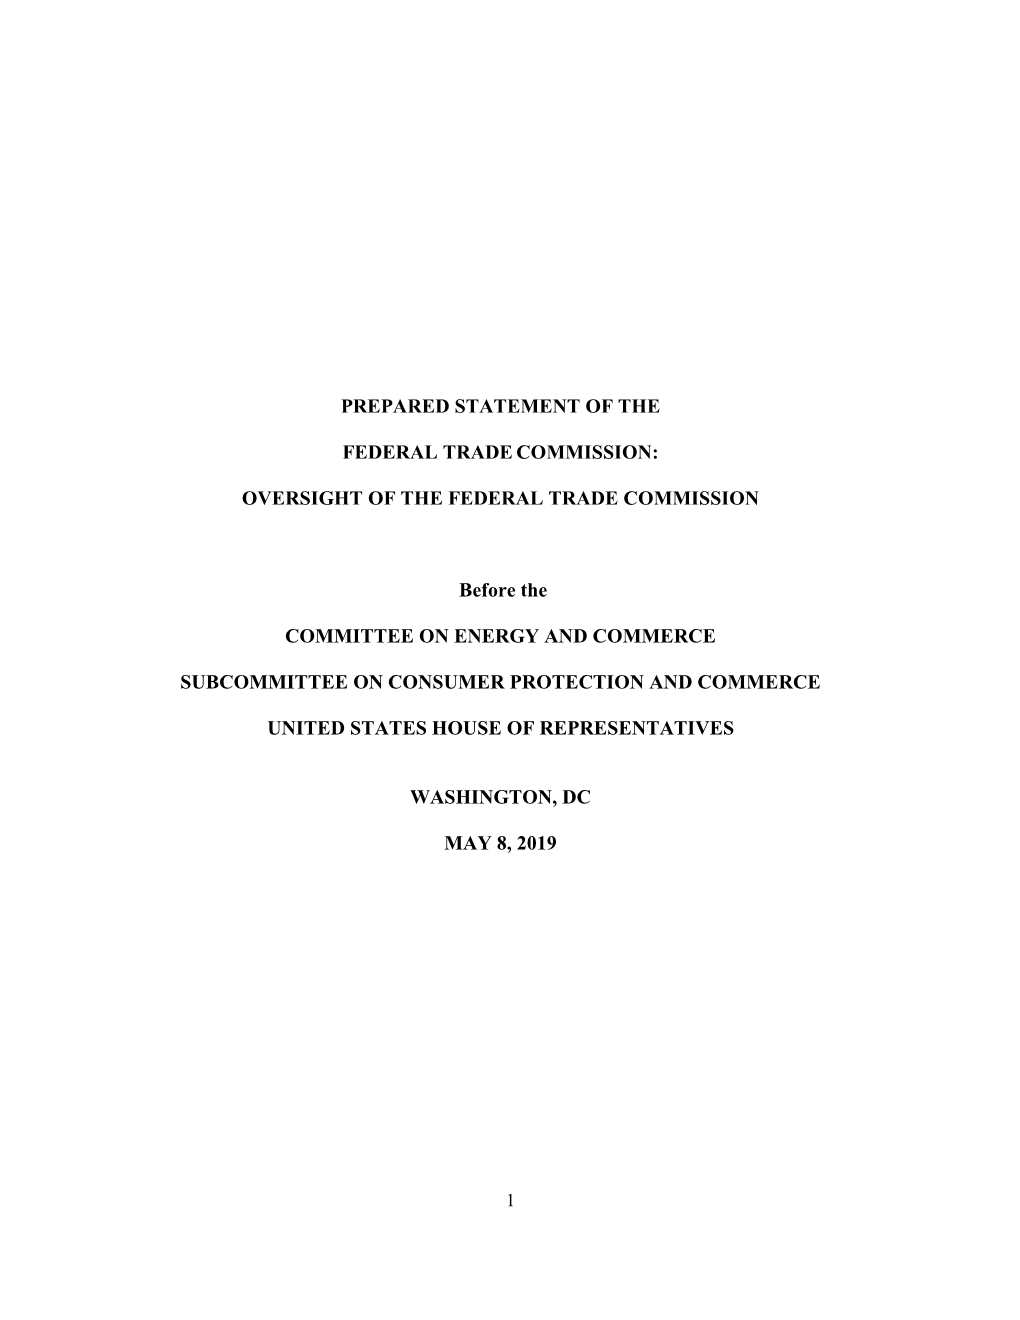 Prepared Statement of the Federal Trade Commission: “Oversight Of